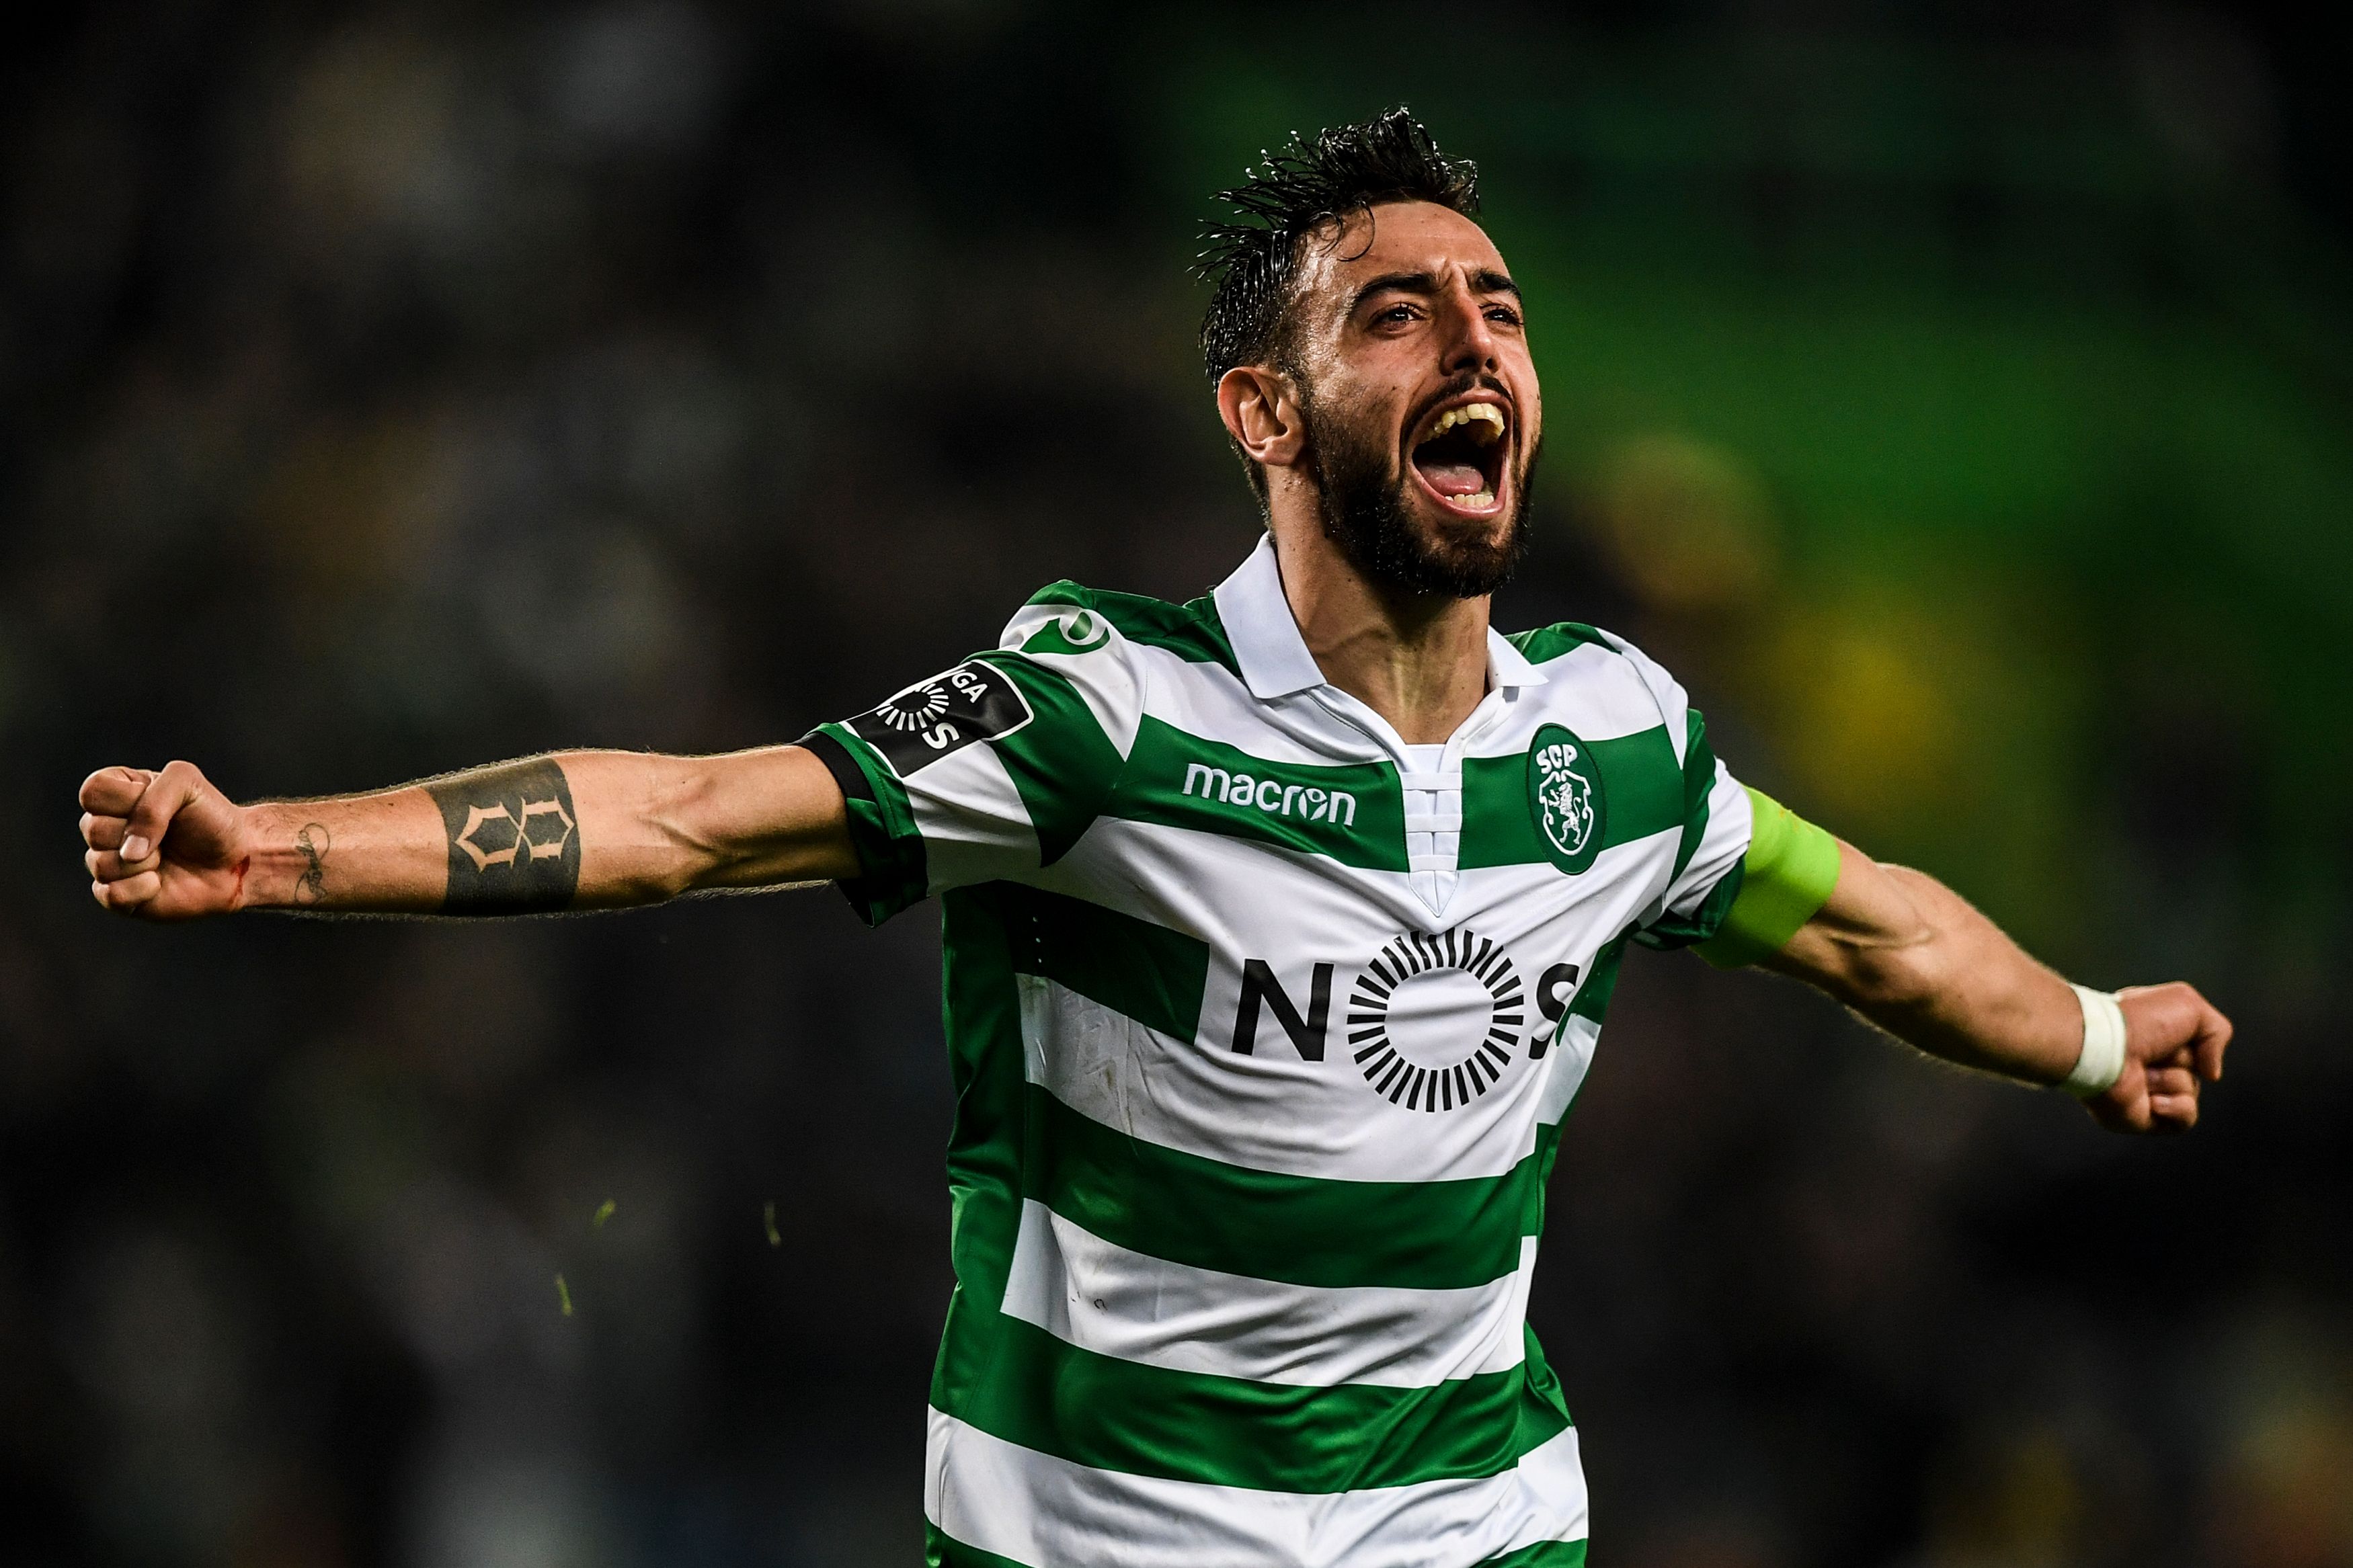 Bruno Fernandes has been Captain Fantastic  for Sporting Lisbon this season. (Photo by Patricia de Melo Moreira/AFP/Getty Images)